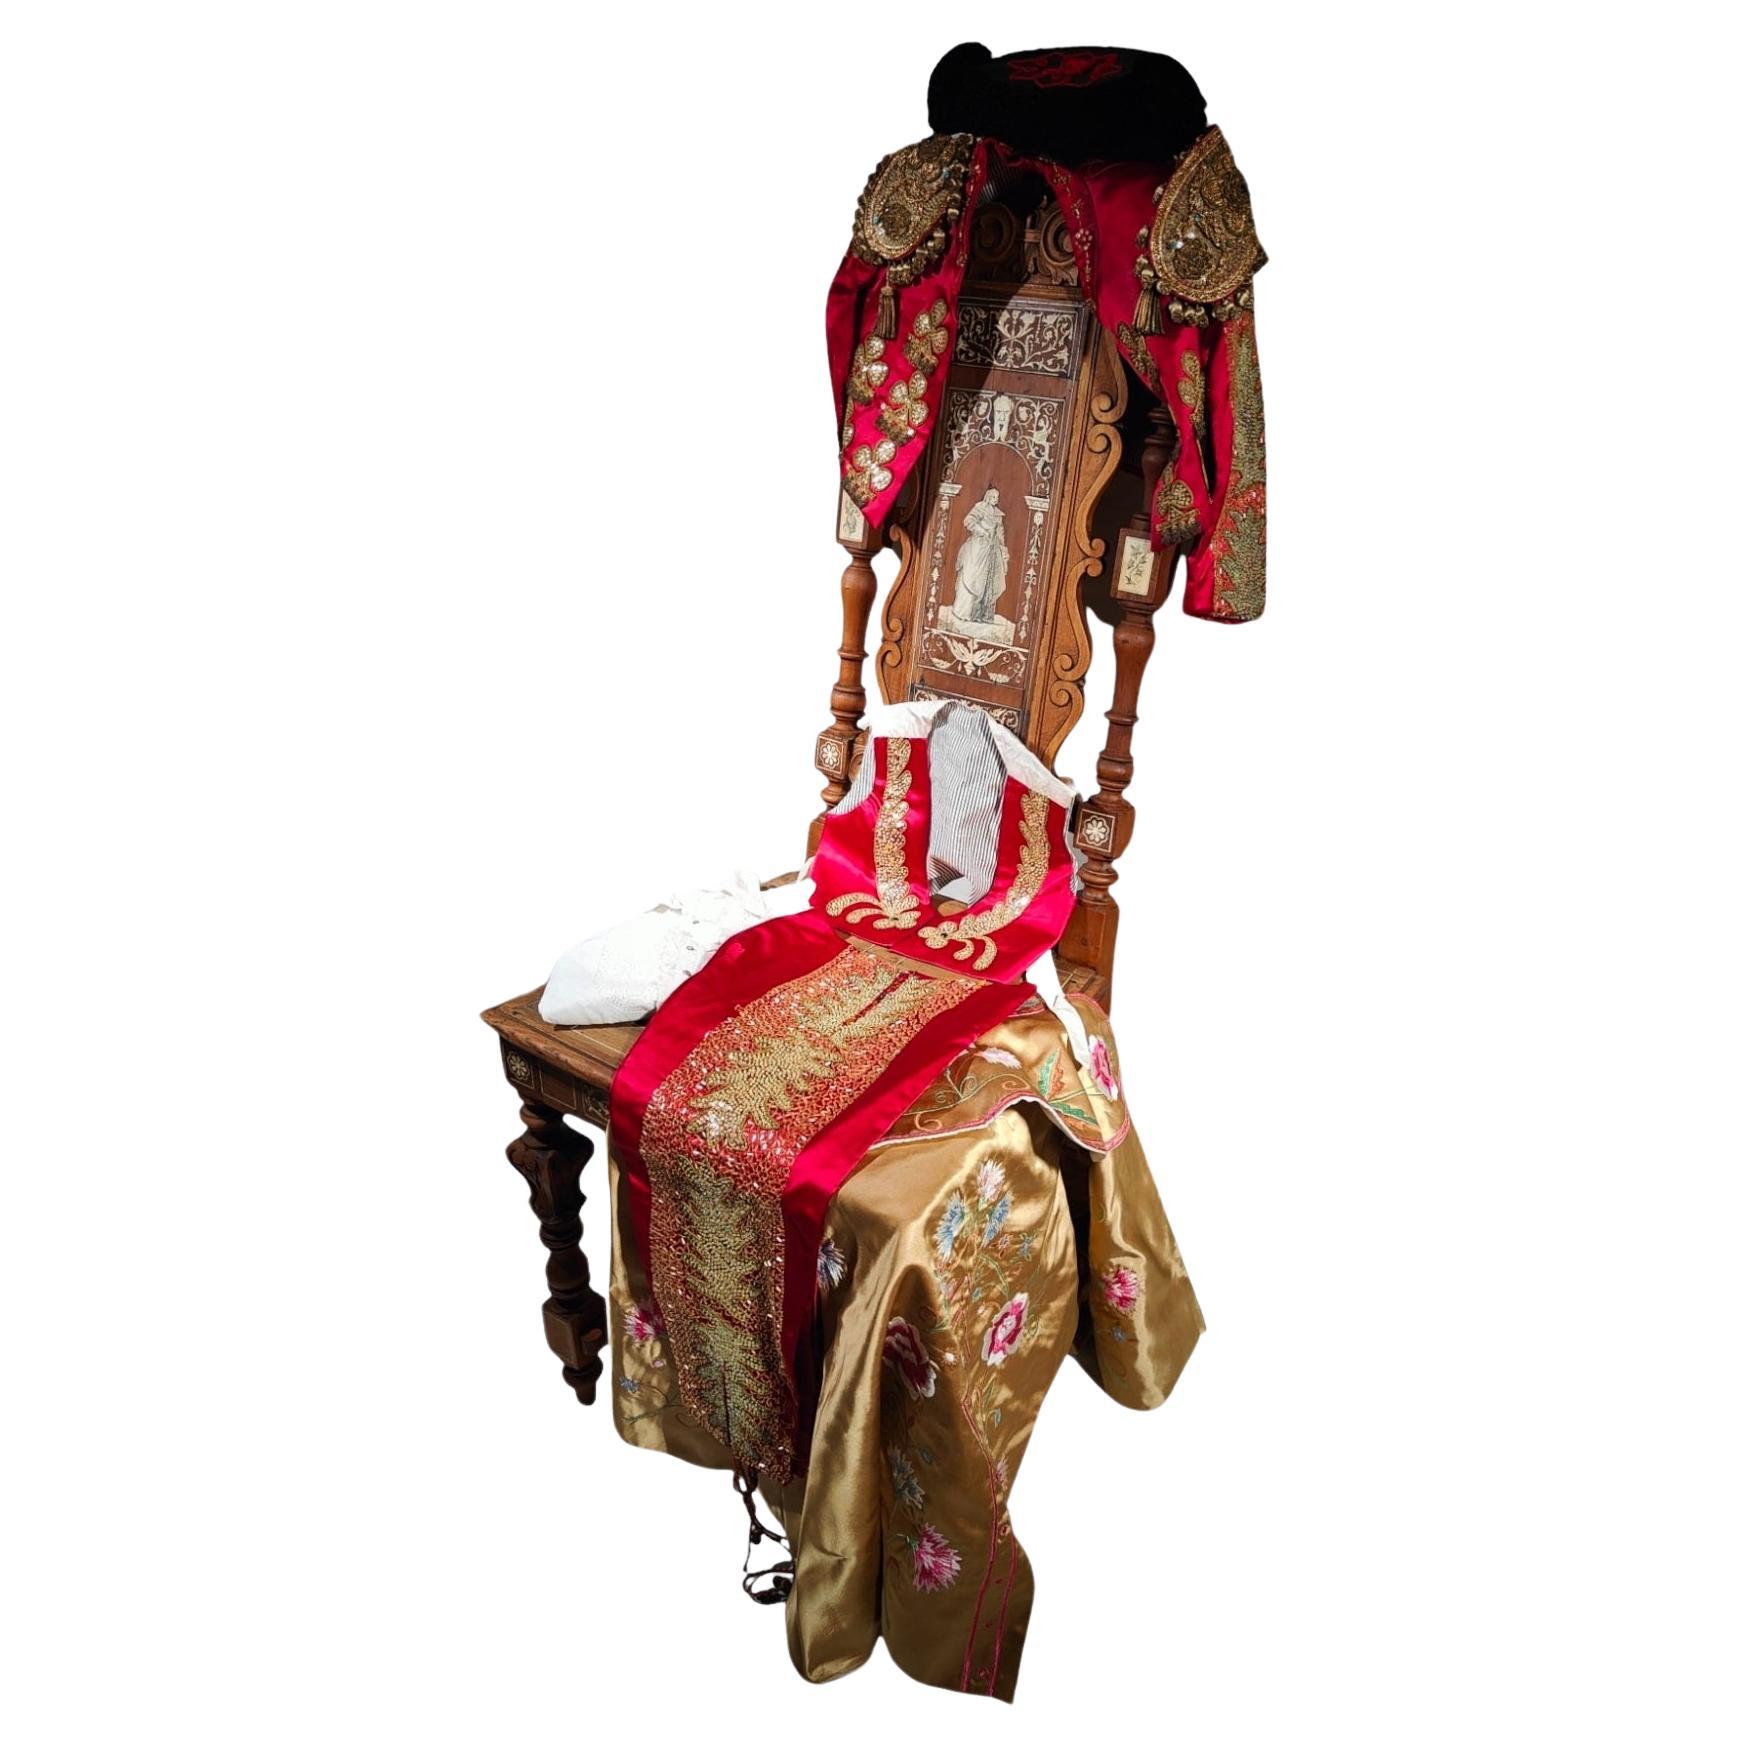 Bullfighter Costume for Children from the 20th Century - A Gem of Children's Bul For Sale